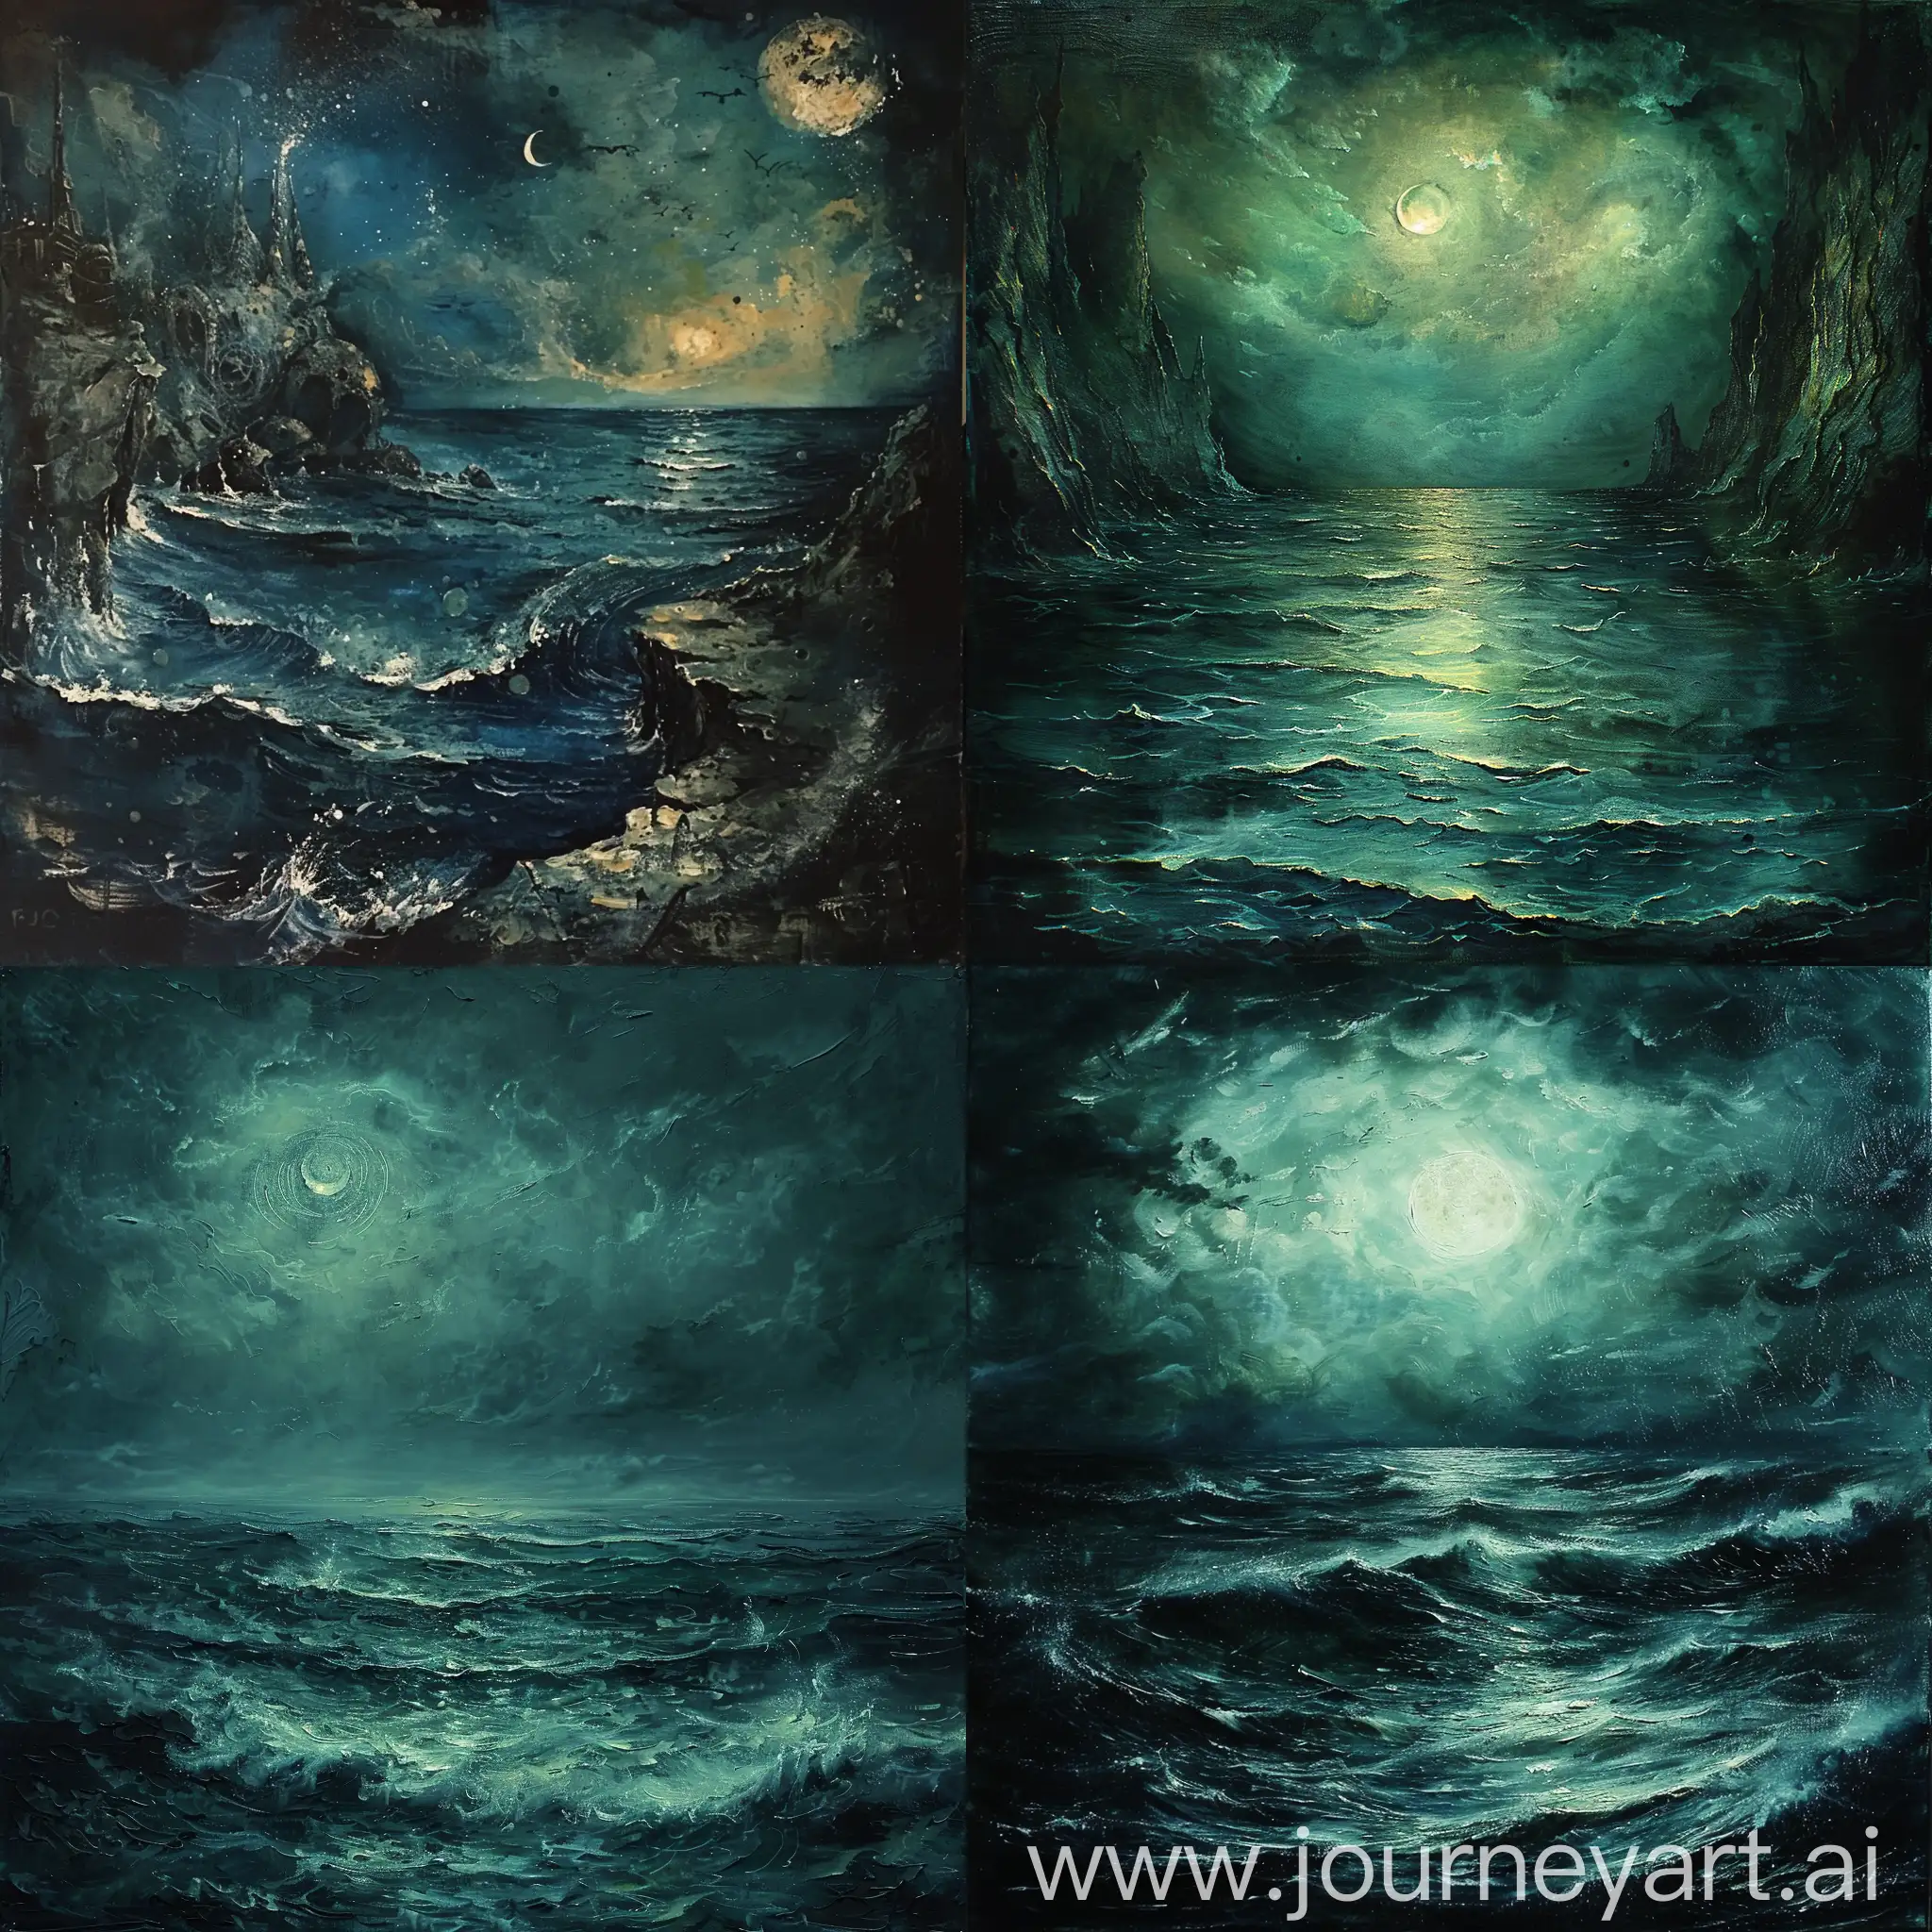 Art for an audio cd cover witch depicts a serene nightmarish night sea, dark oil painting style somewhere in between H.P. Lovecraft and Edgar Allan Poe